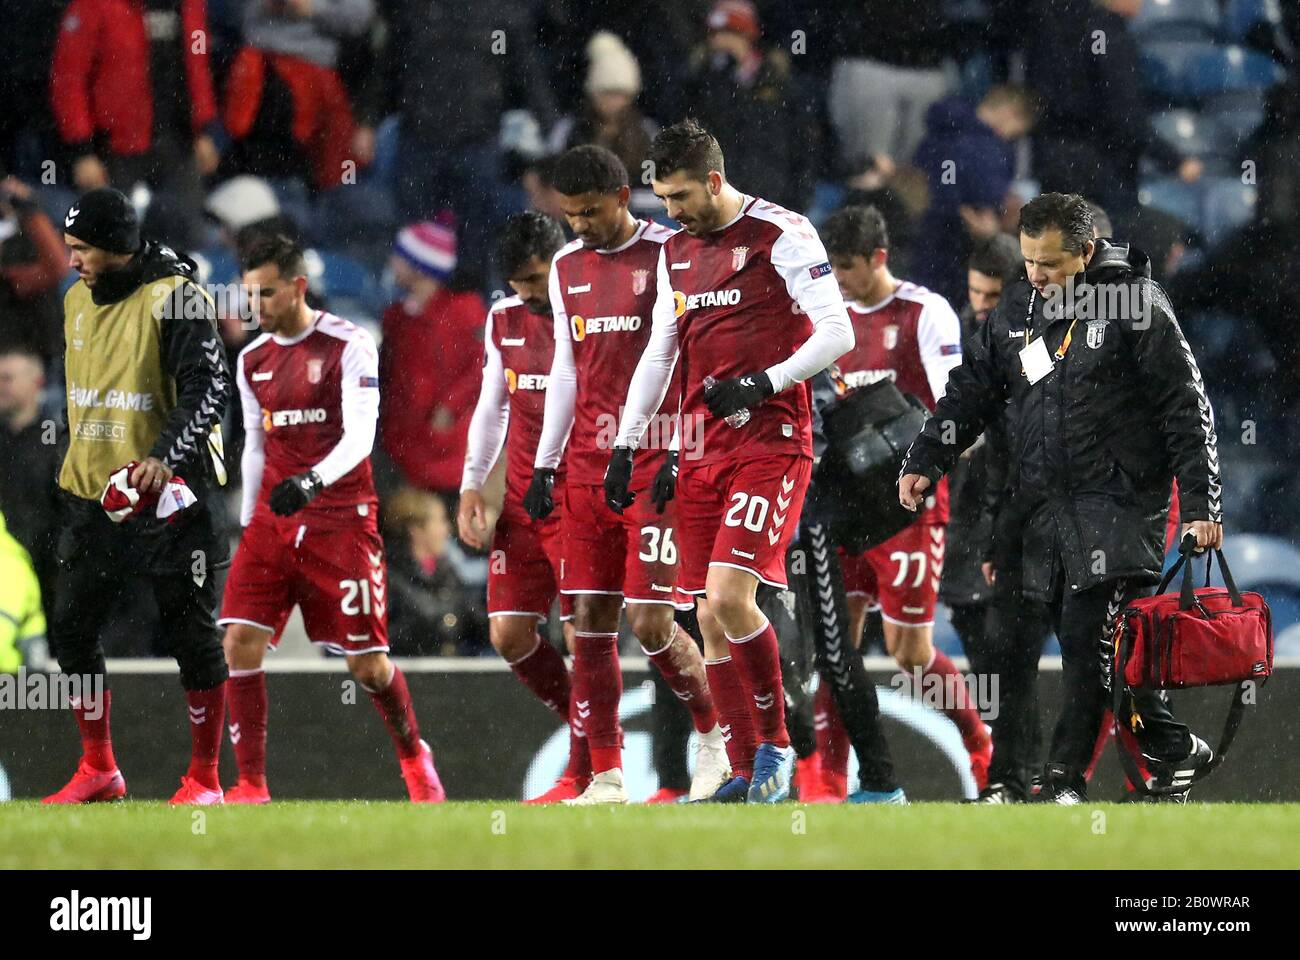 Braga's Fernandes Paulinho (centre) appears dejected with team-mates after the final whistle during the UEFA Europa League round of 32 first leg match at Ibrox Stadium, Glasgow. Stock Photo